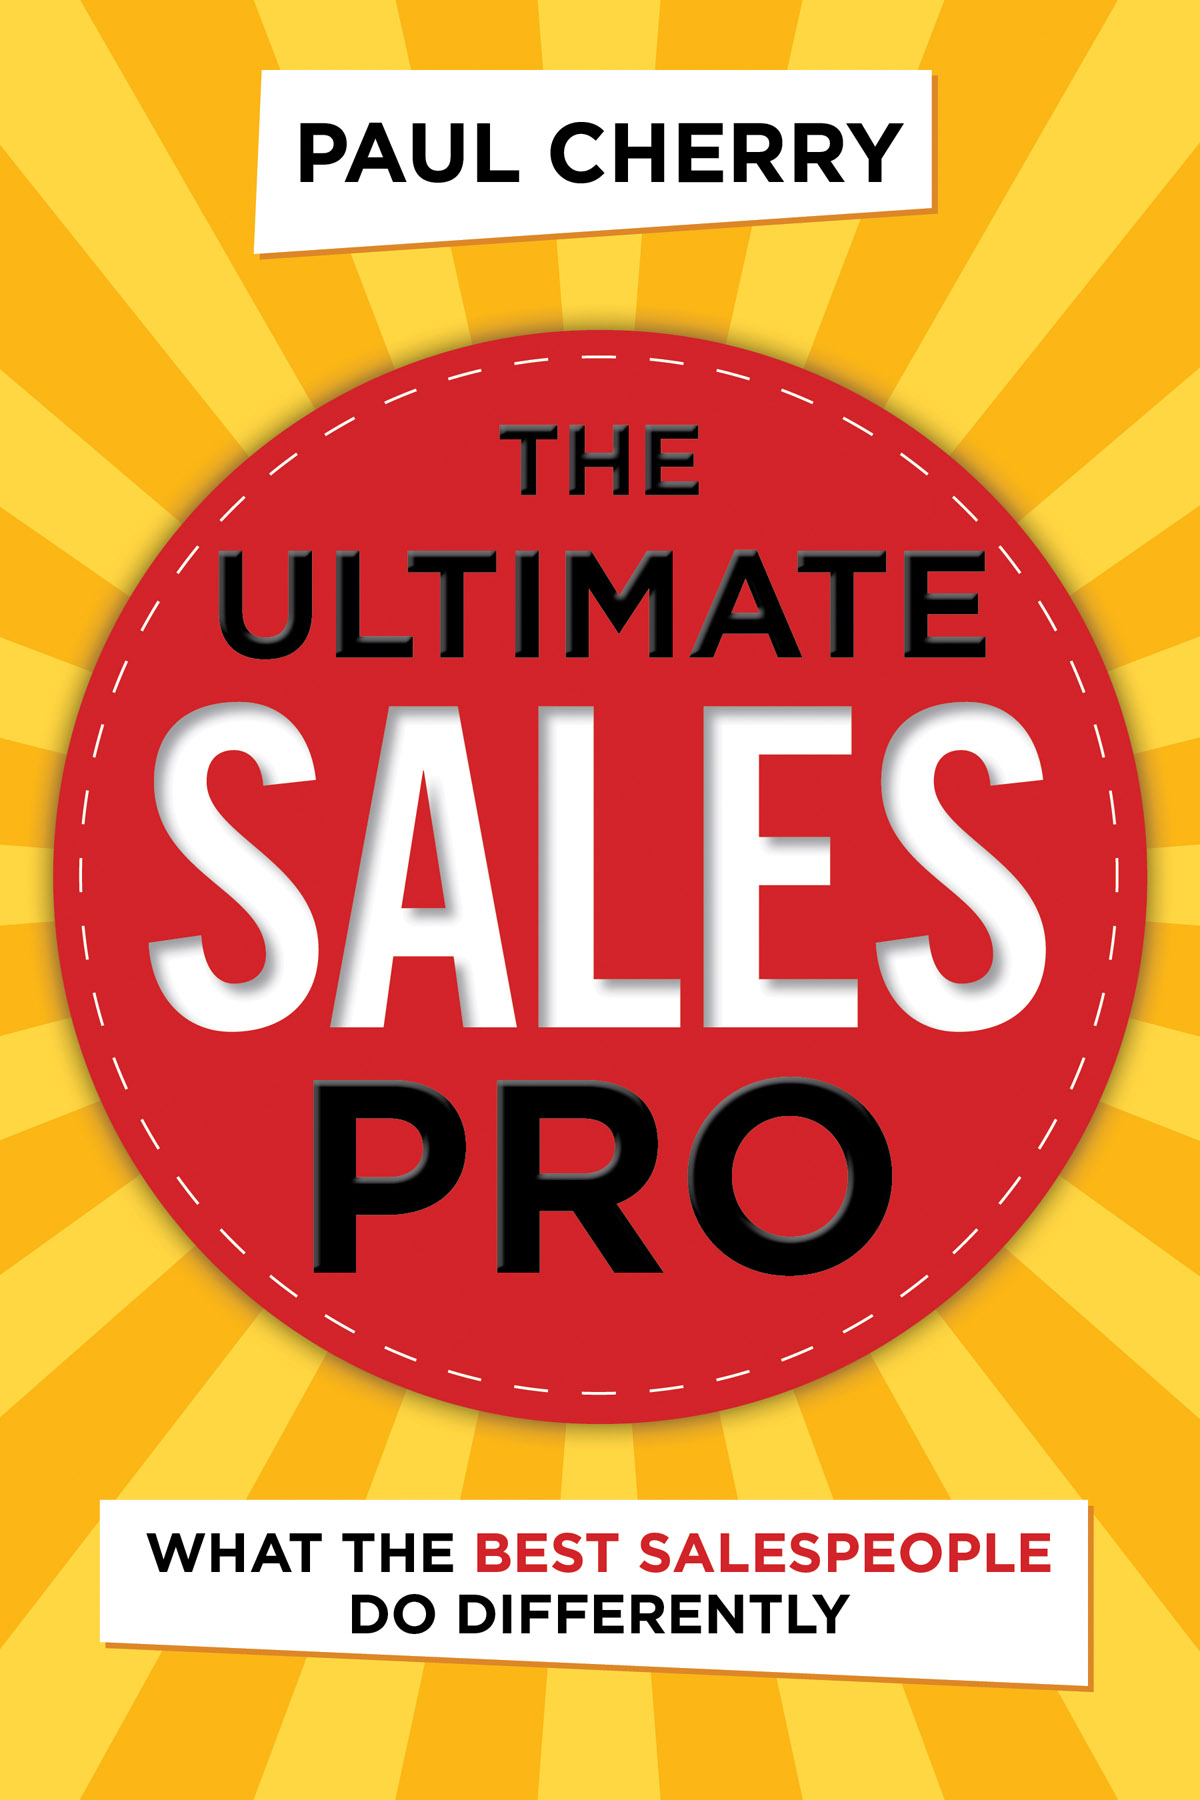 CONTENTS Guide 2018 Paul Cherry The Ultimate Sales Pro All rights reserved - photo 1